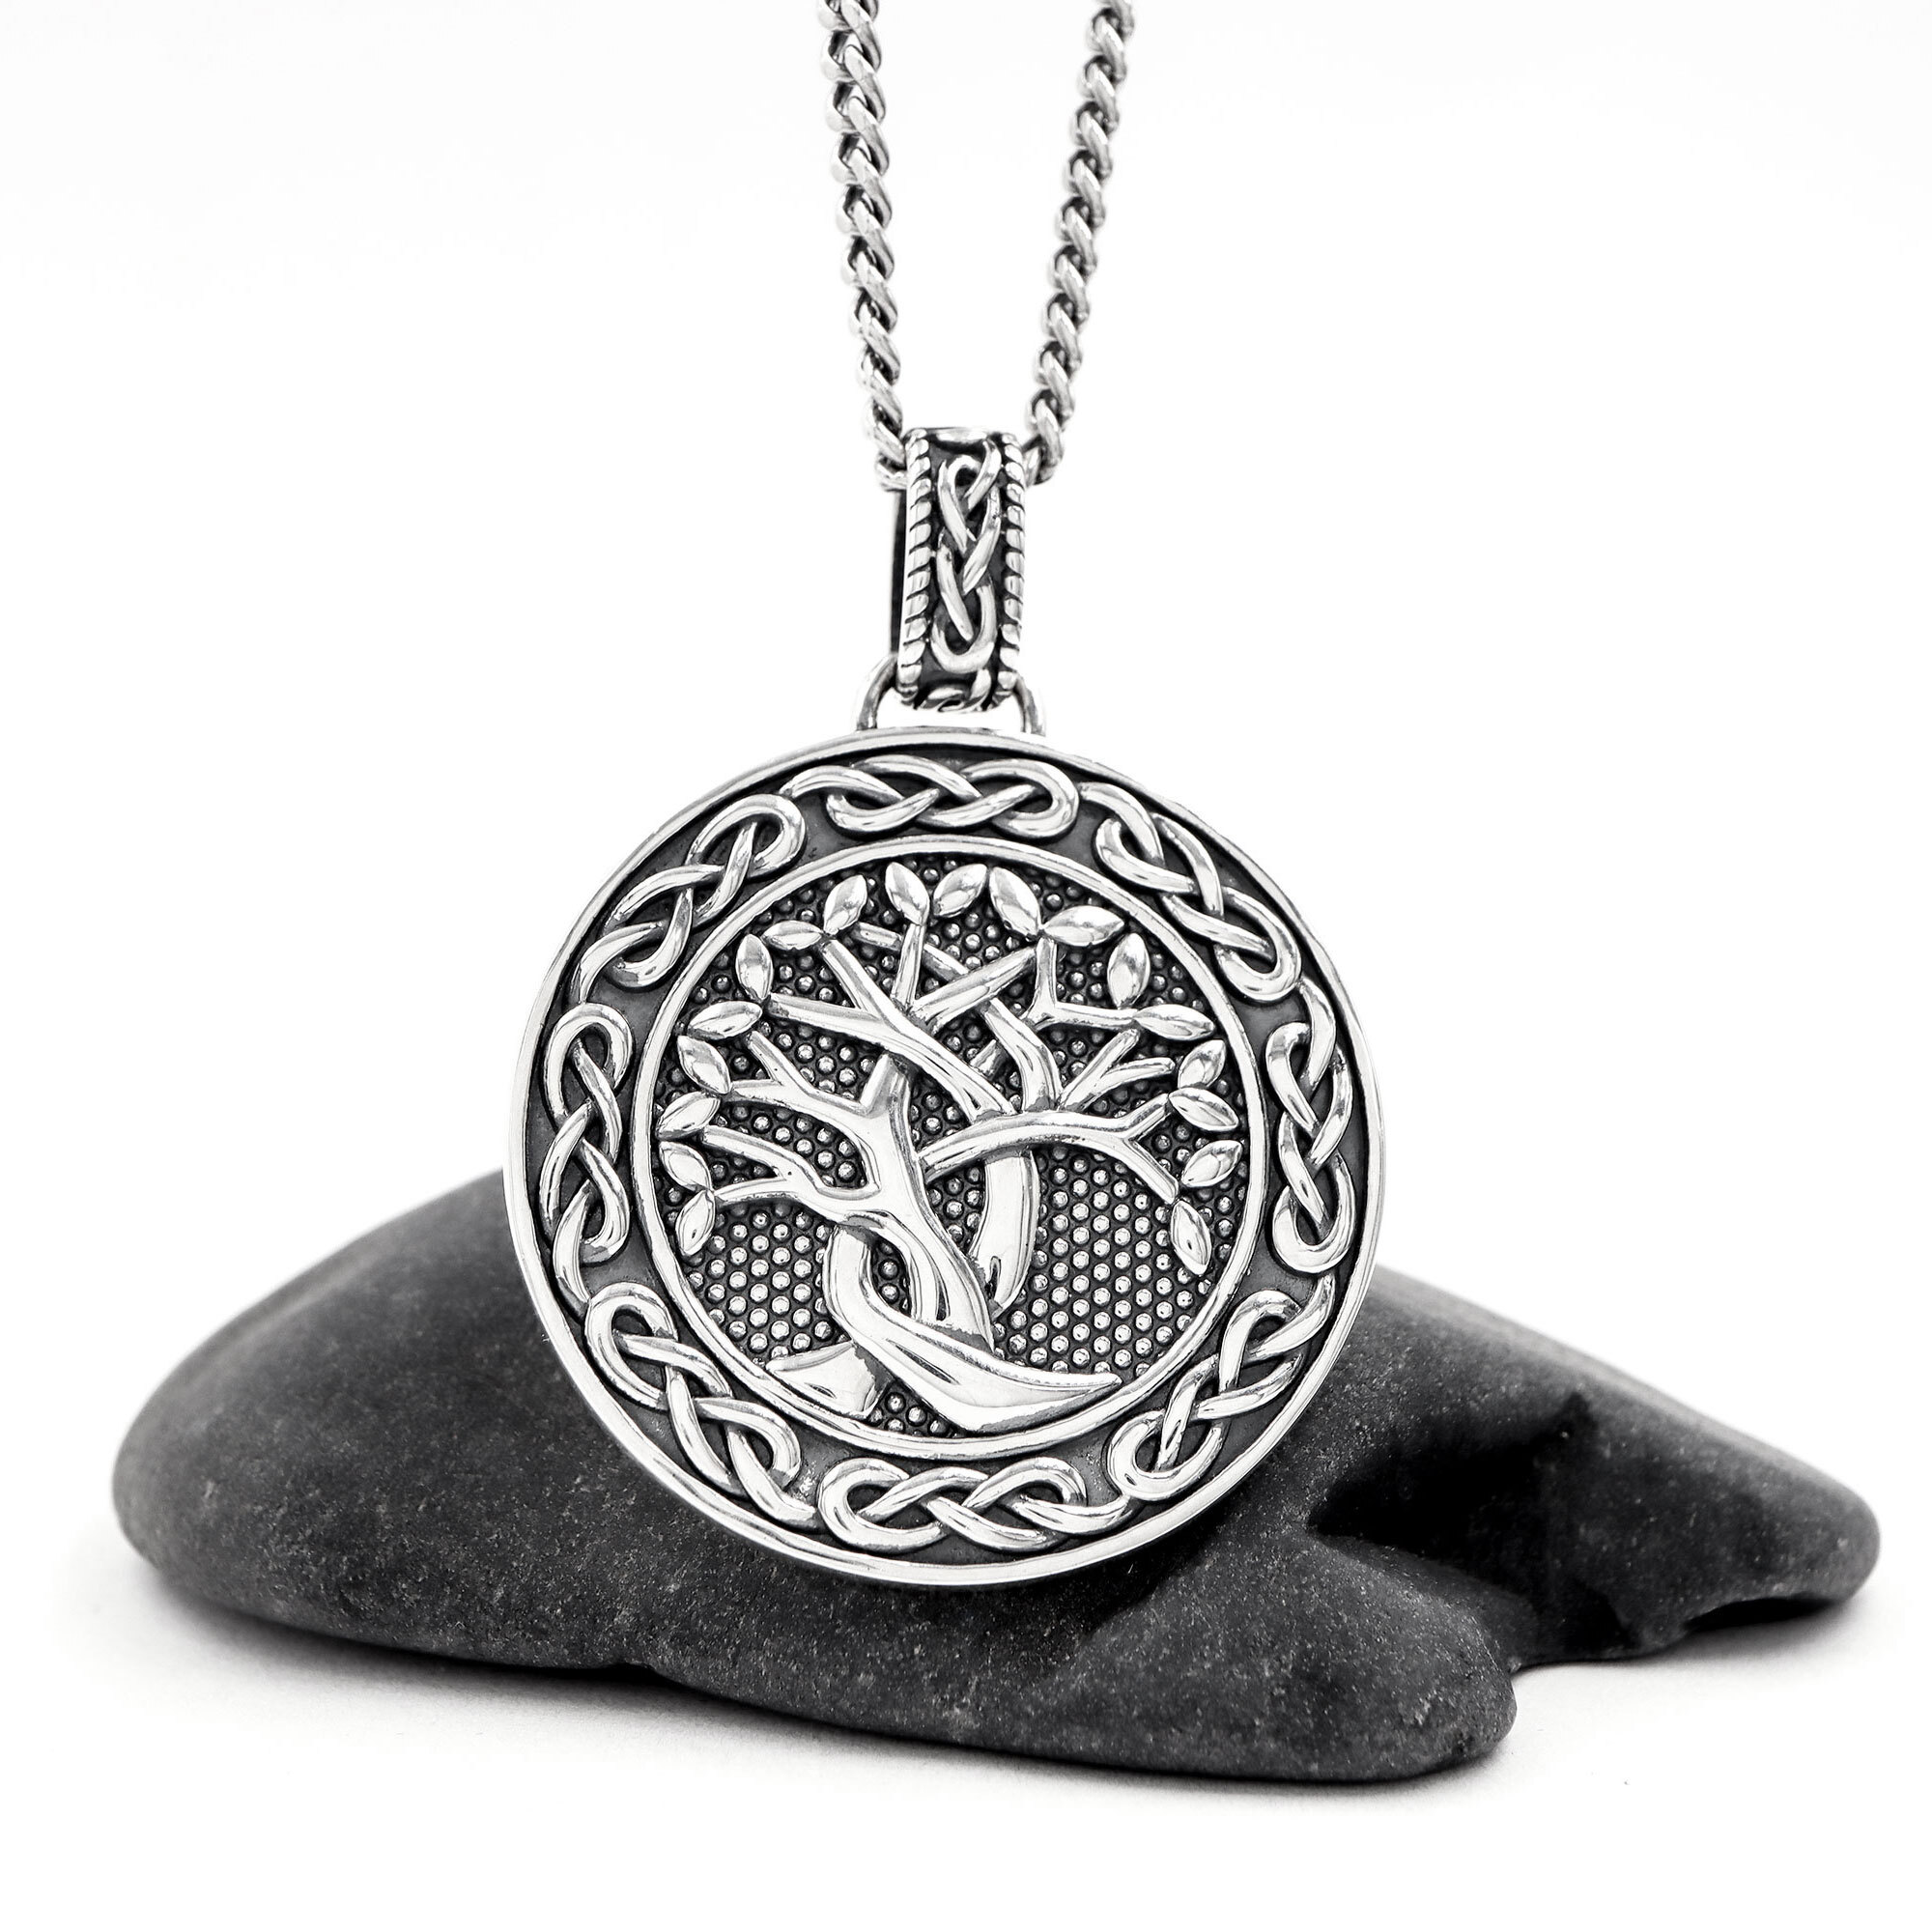 Sterling Silver Tree Of Life Necklace - La Paz County Sheriff's Office  